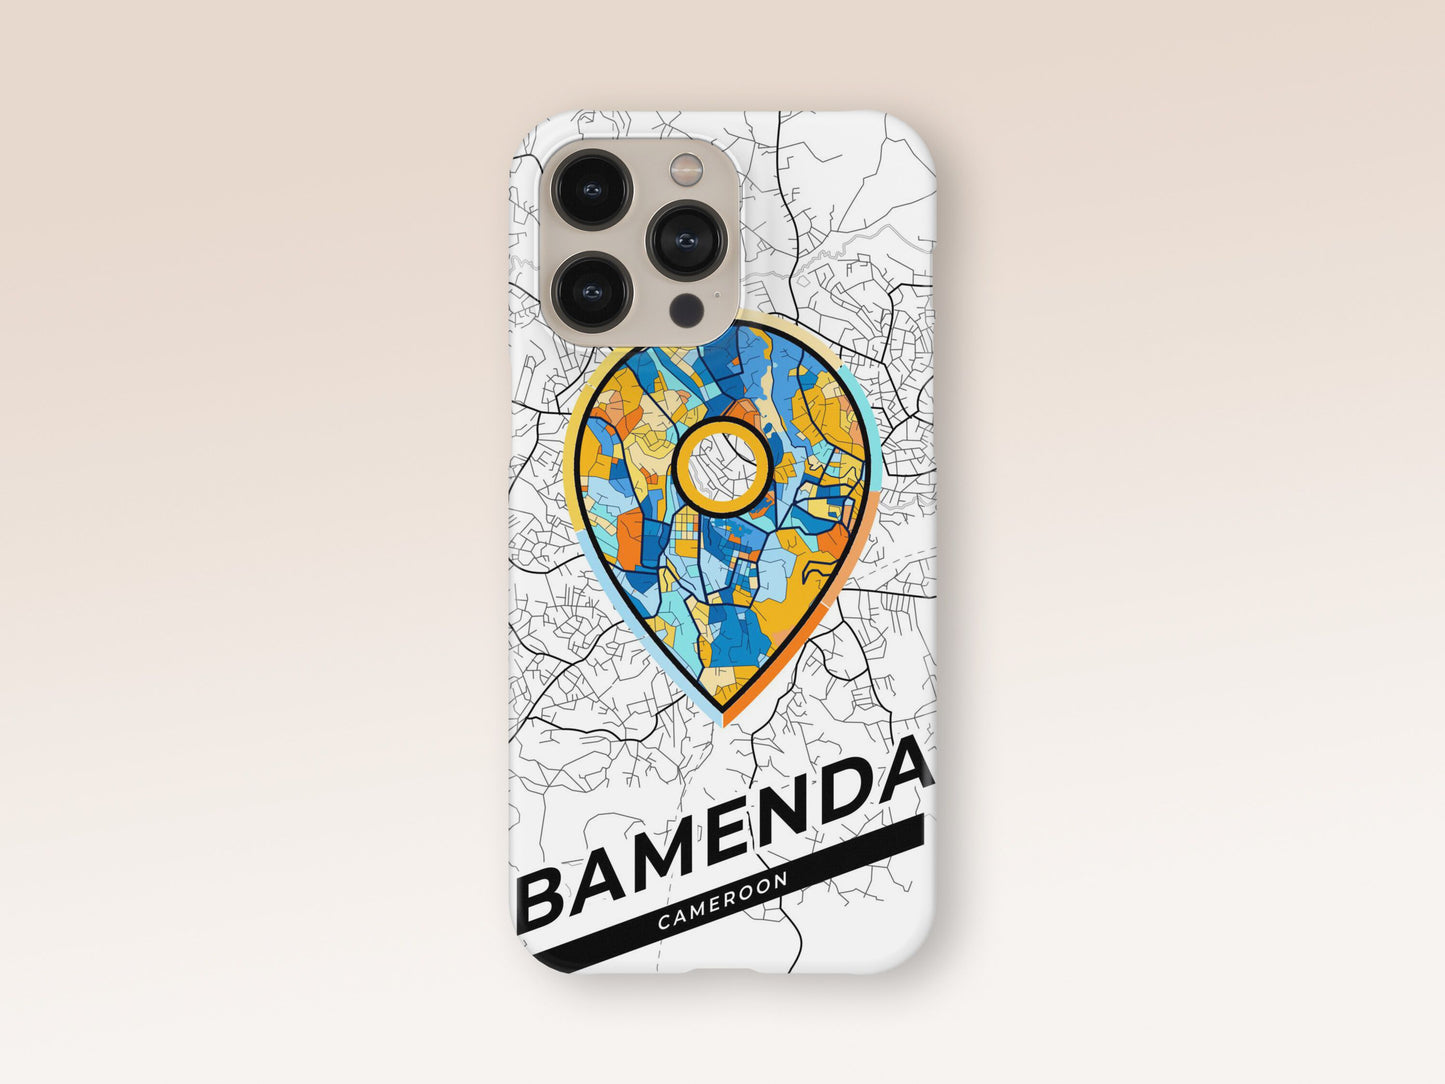 Bamenda Cameroon slim phone case with colorful icon. Birthday, wedding or housewarming gift. Couple match cases. 1